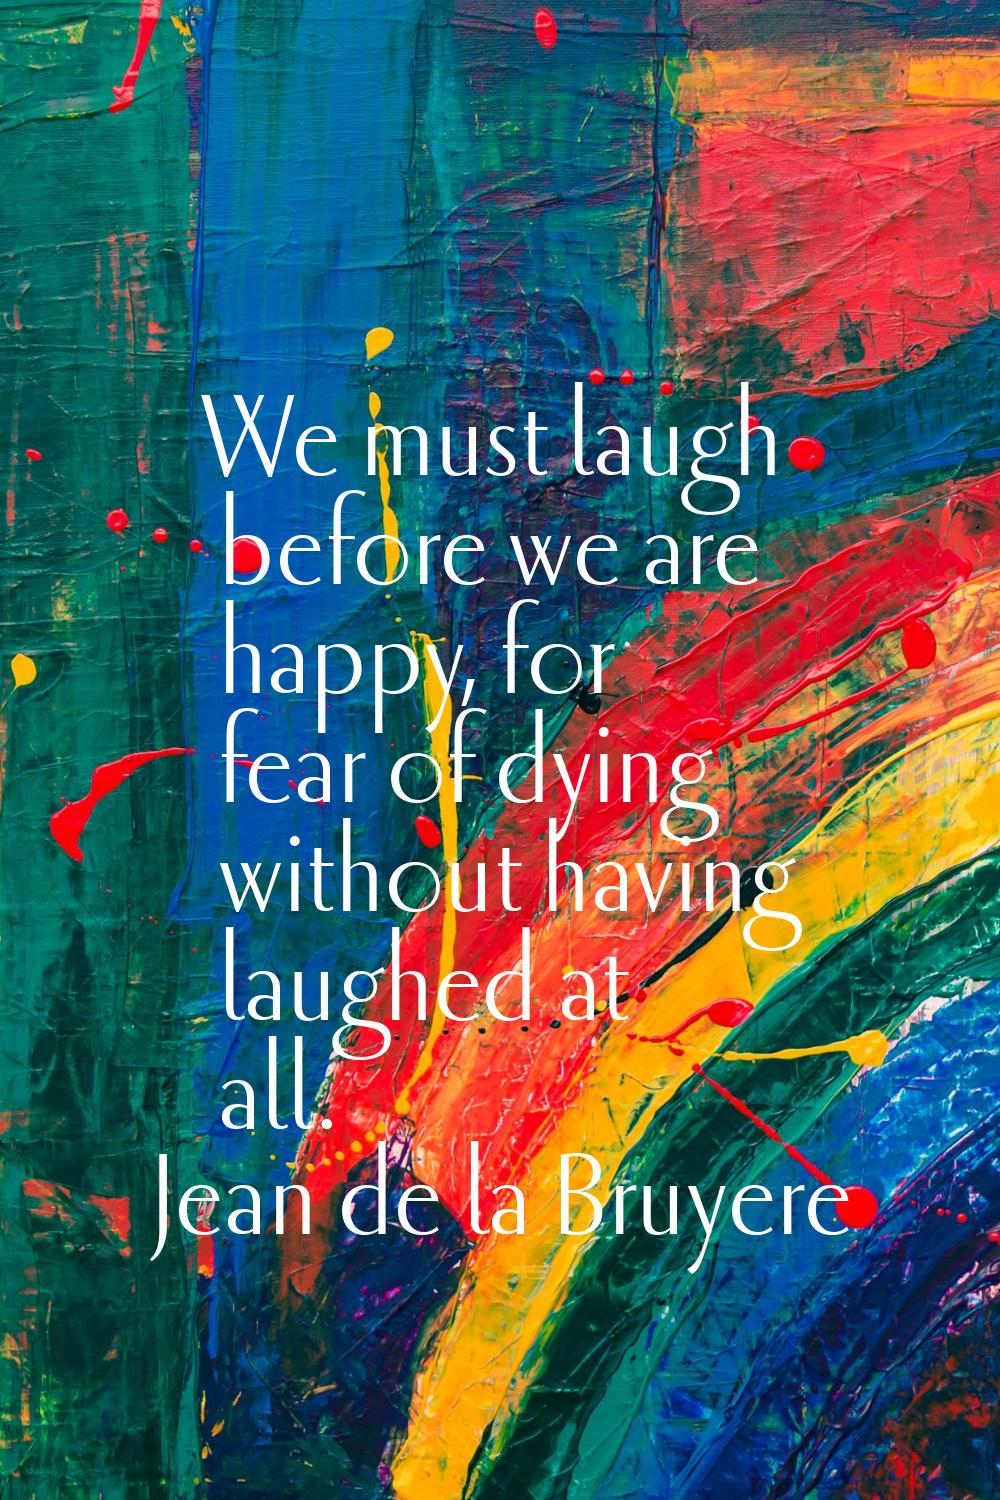 We must laugh before we are happy, for fear of dying without having laughed at all.